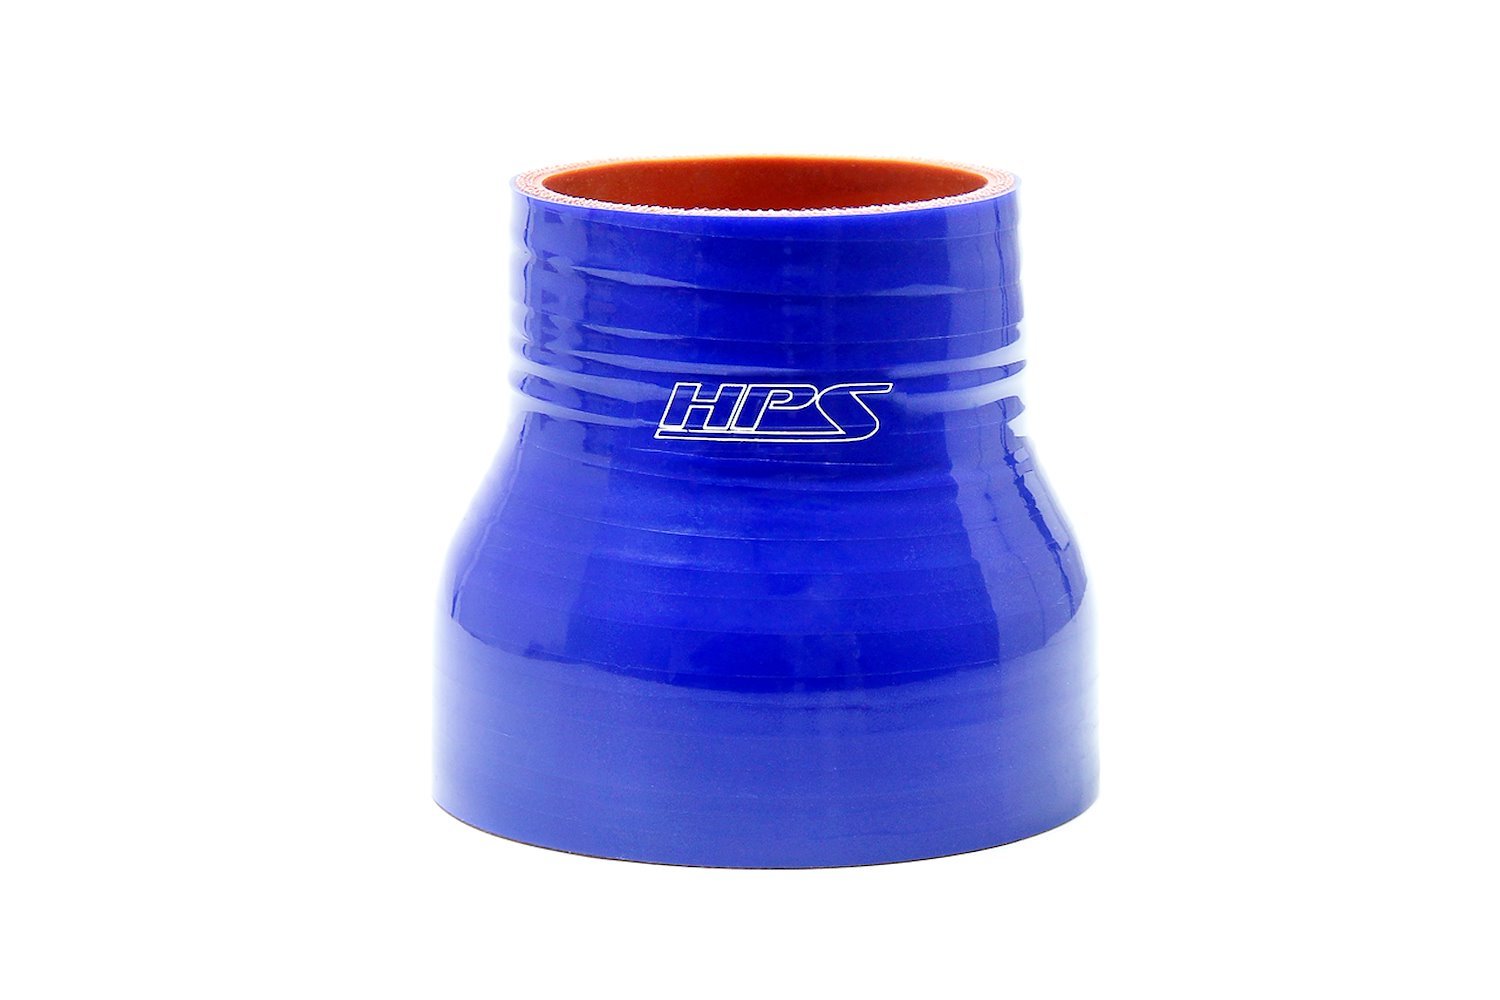 HTSR-238-275-BLUE Silicone Reducer Hose, High-Temp 4-Ply Reinforced, 2-3/8 in. - 2-3/4 in. ID, 3 in. Long, Blue